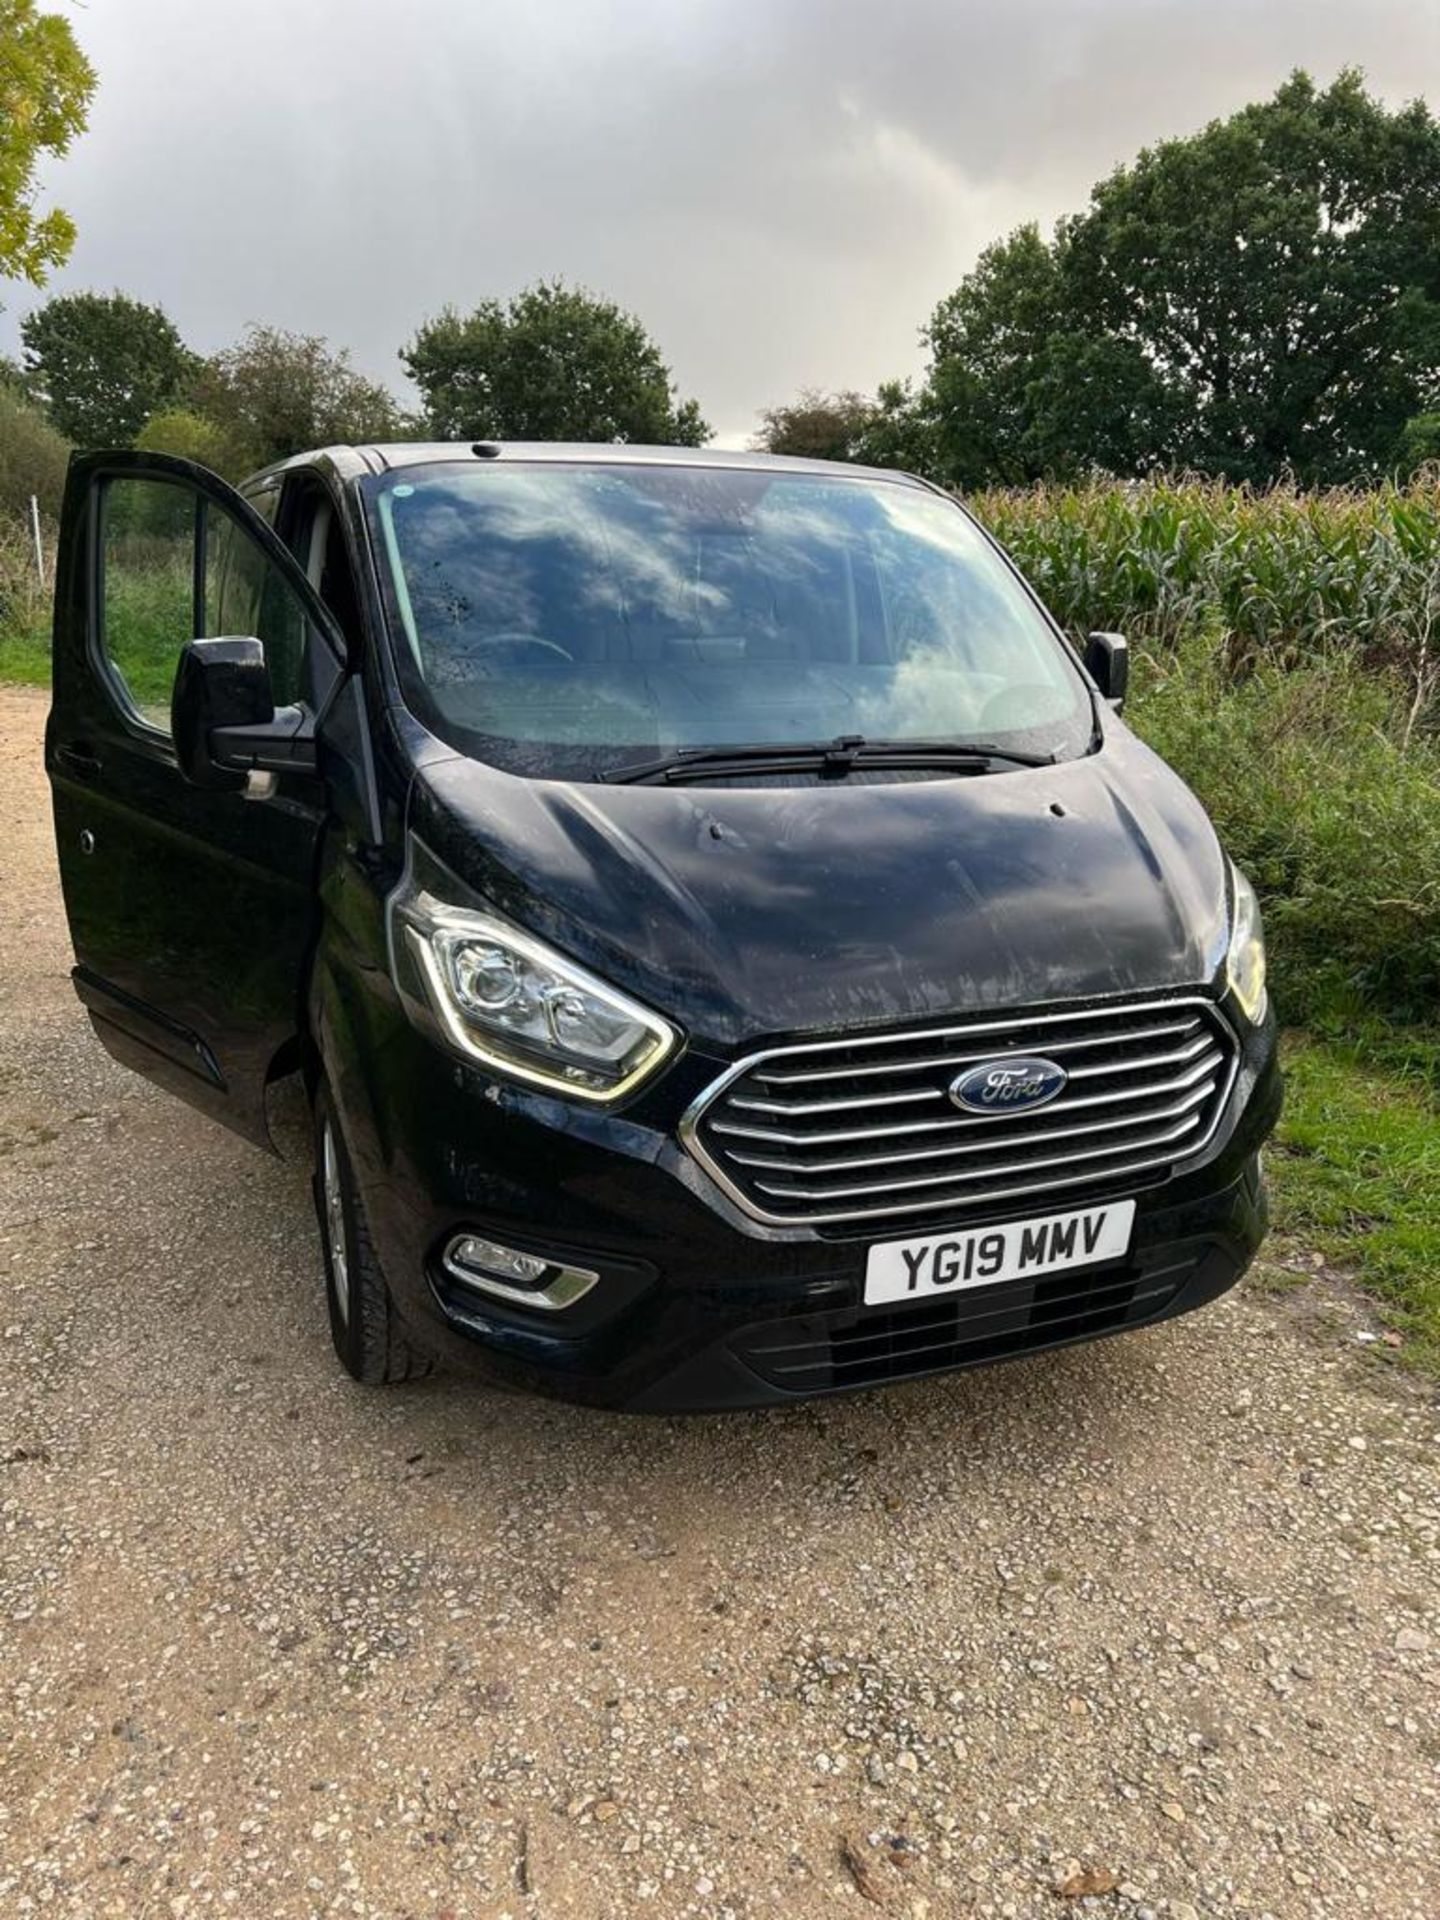 2019 FORD INDEPENDENCE RS AUTO BLACK WAV TOURNEO *NO VAT*